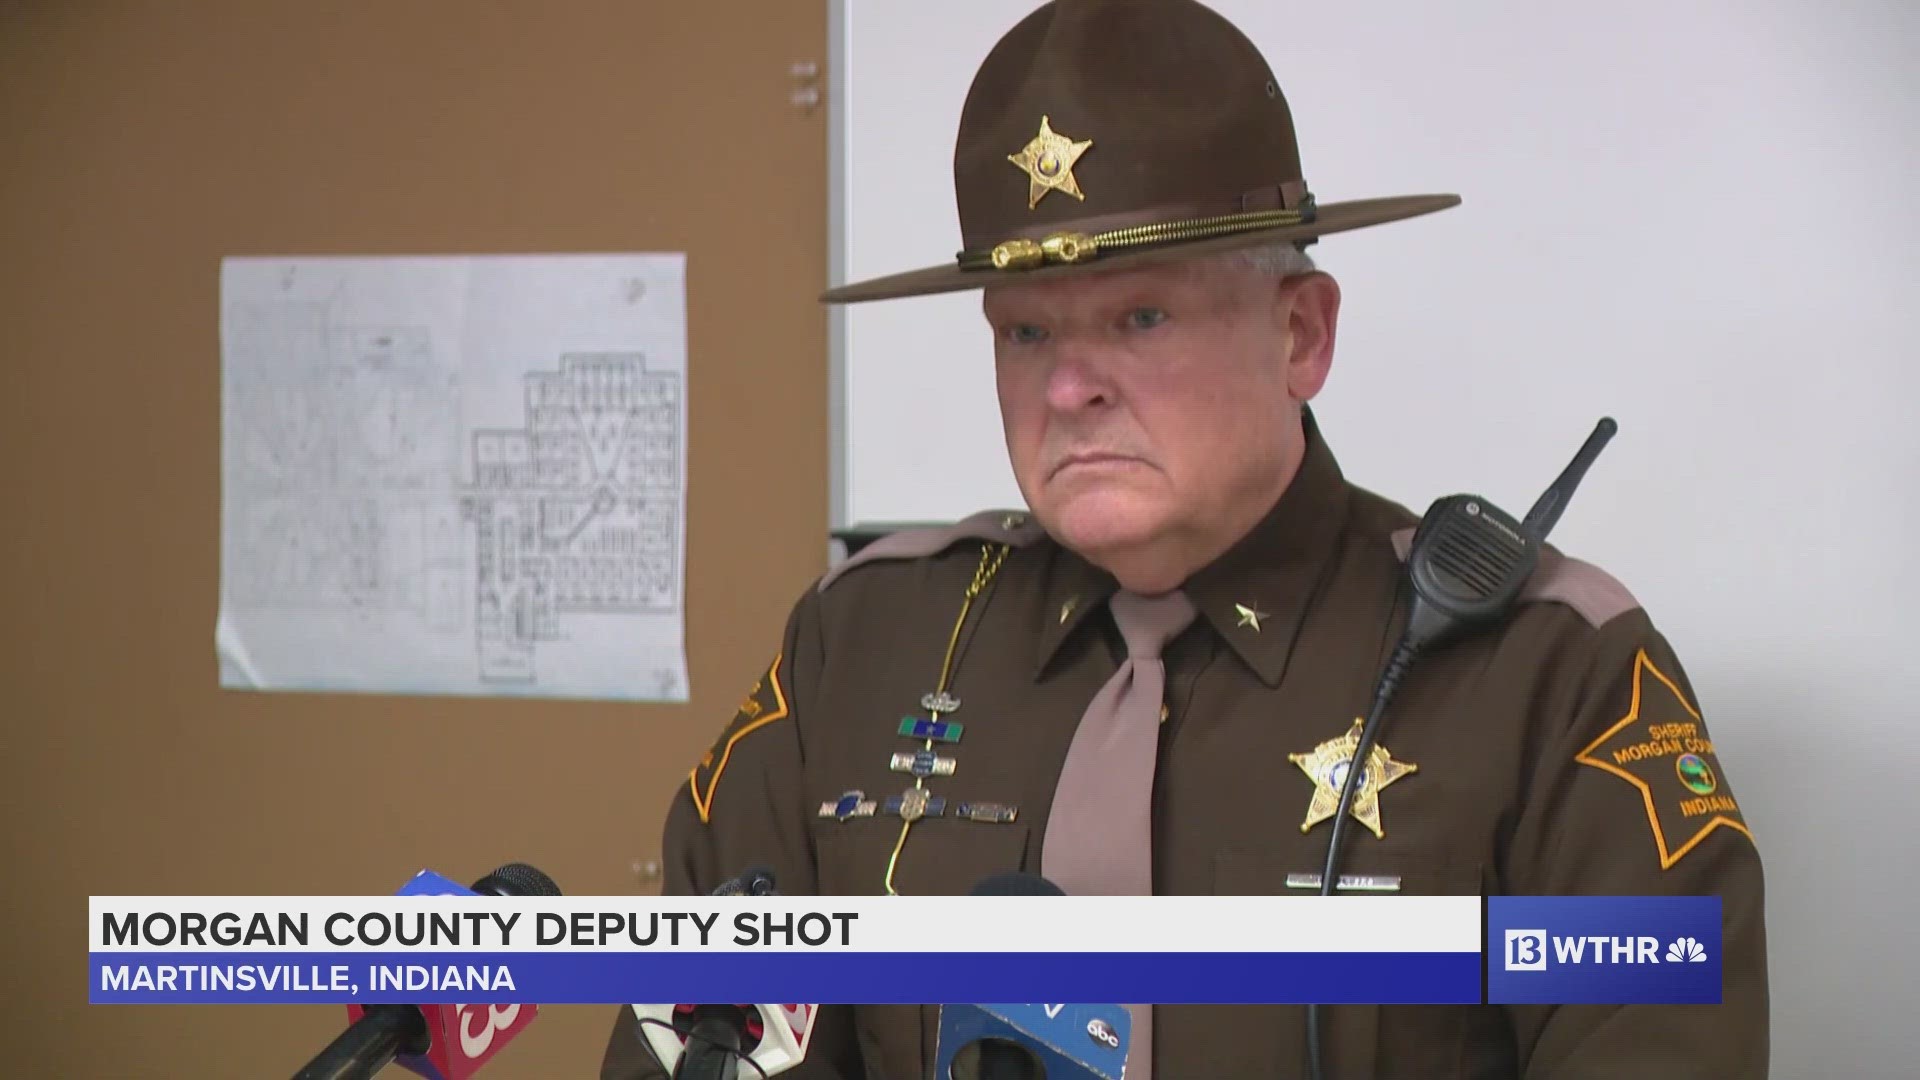 Morgan County Deputy Mallory Schwab was wounded by a 15-year-old suspect during a welfare check.